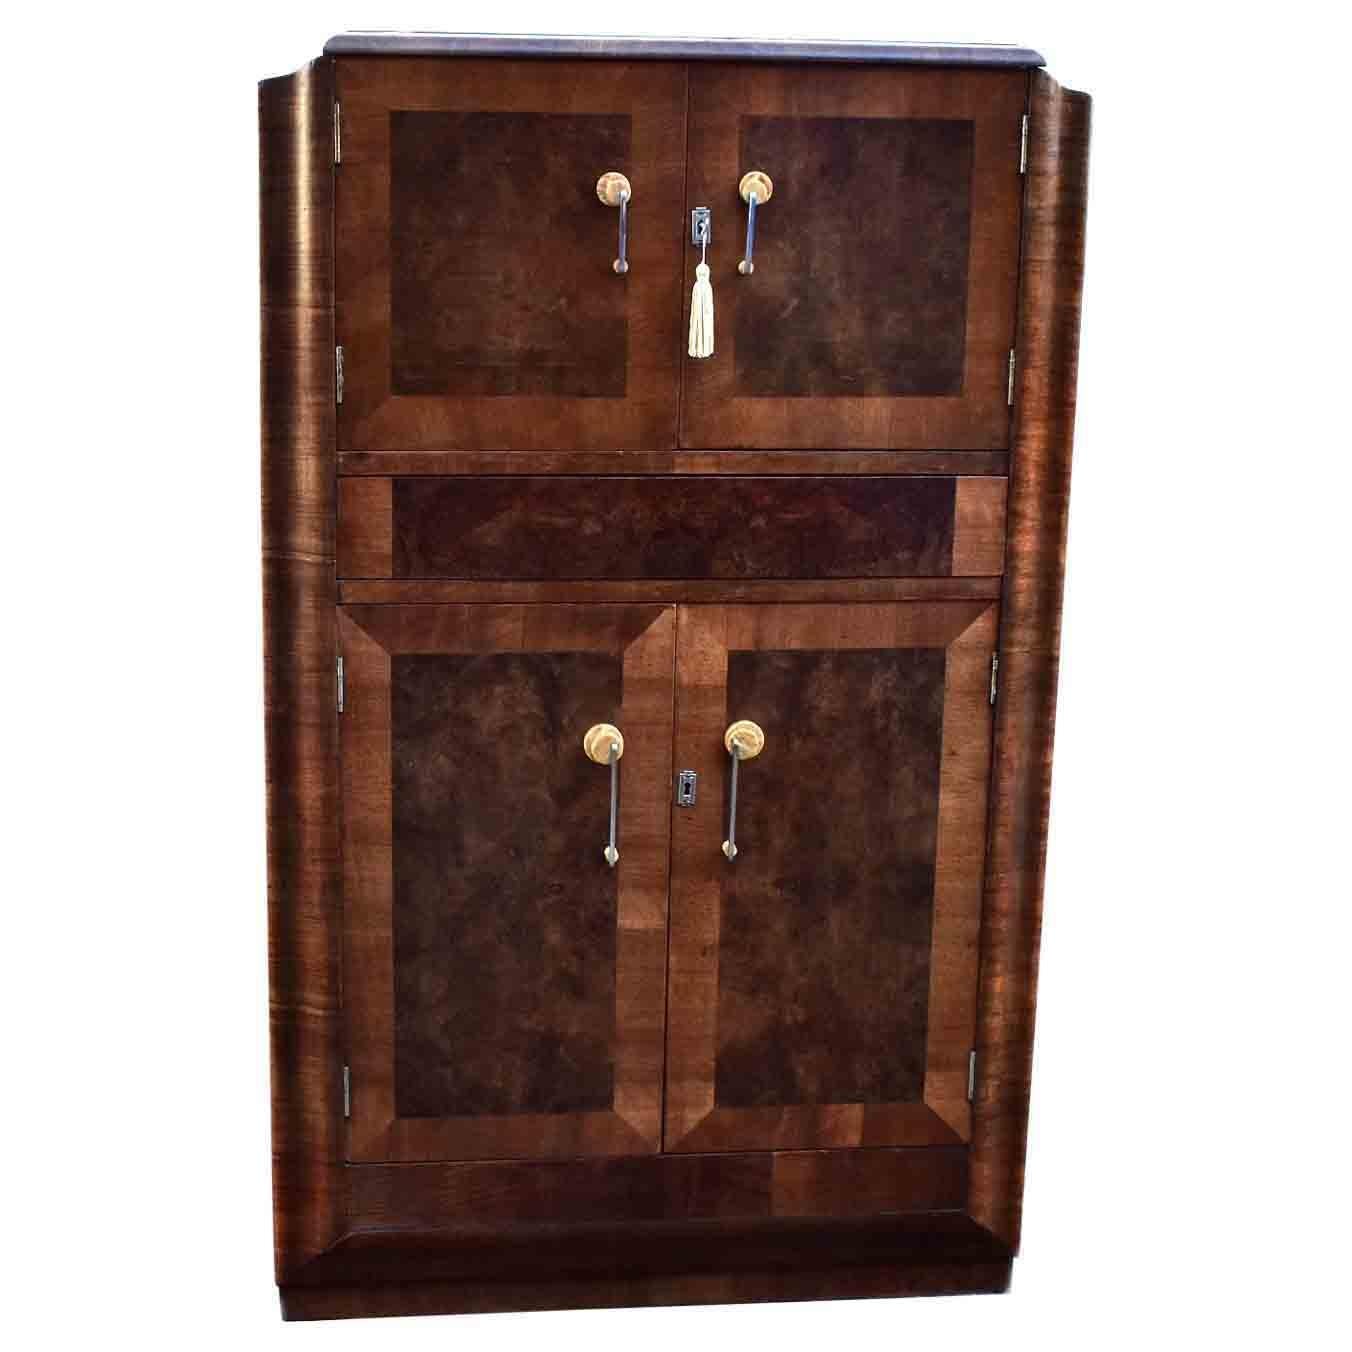 English Art Deco Fitted Burr Walnut Cocktail Cabinet or Dry Bar